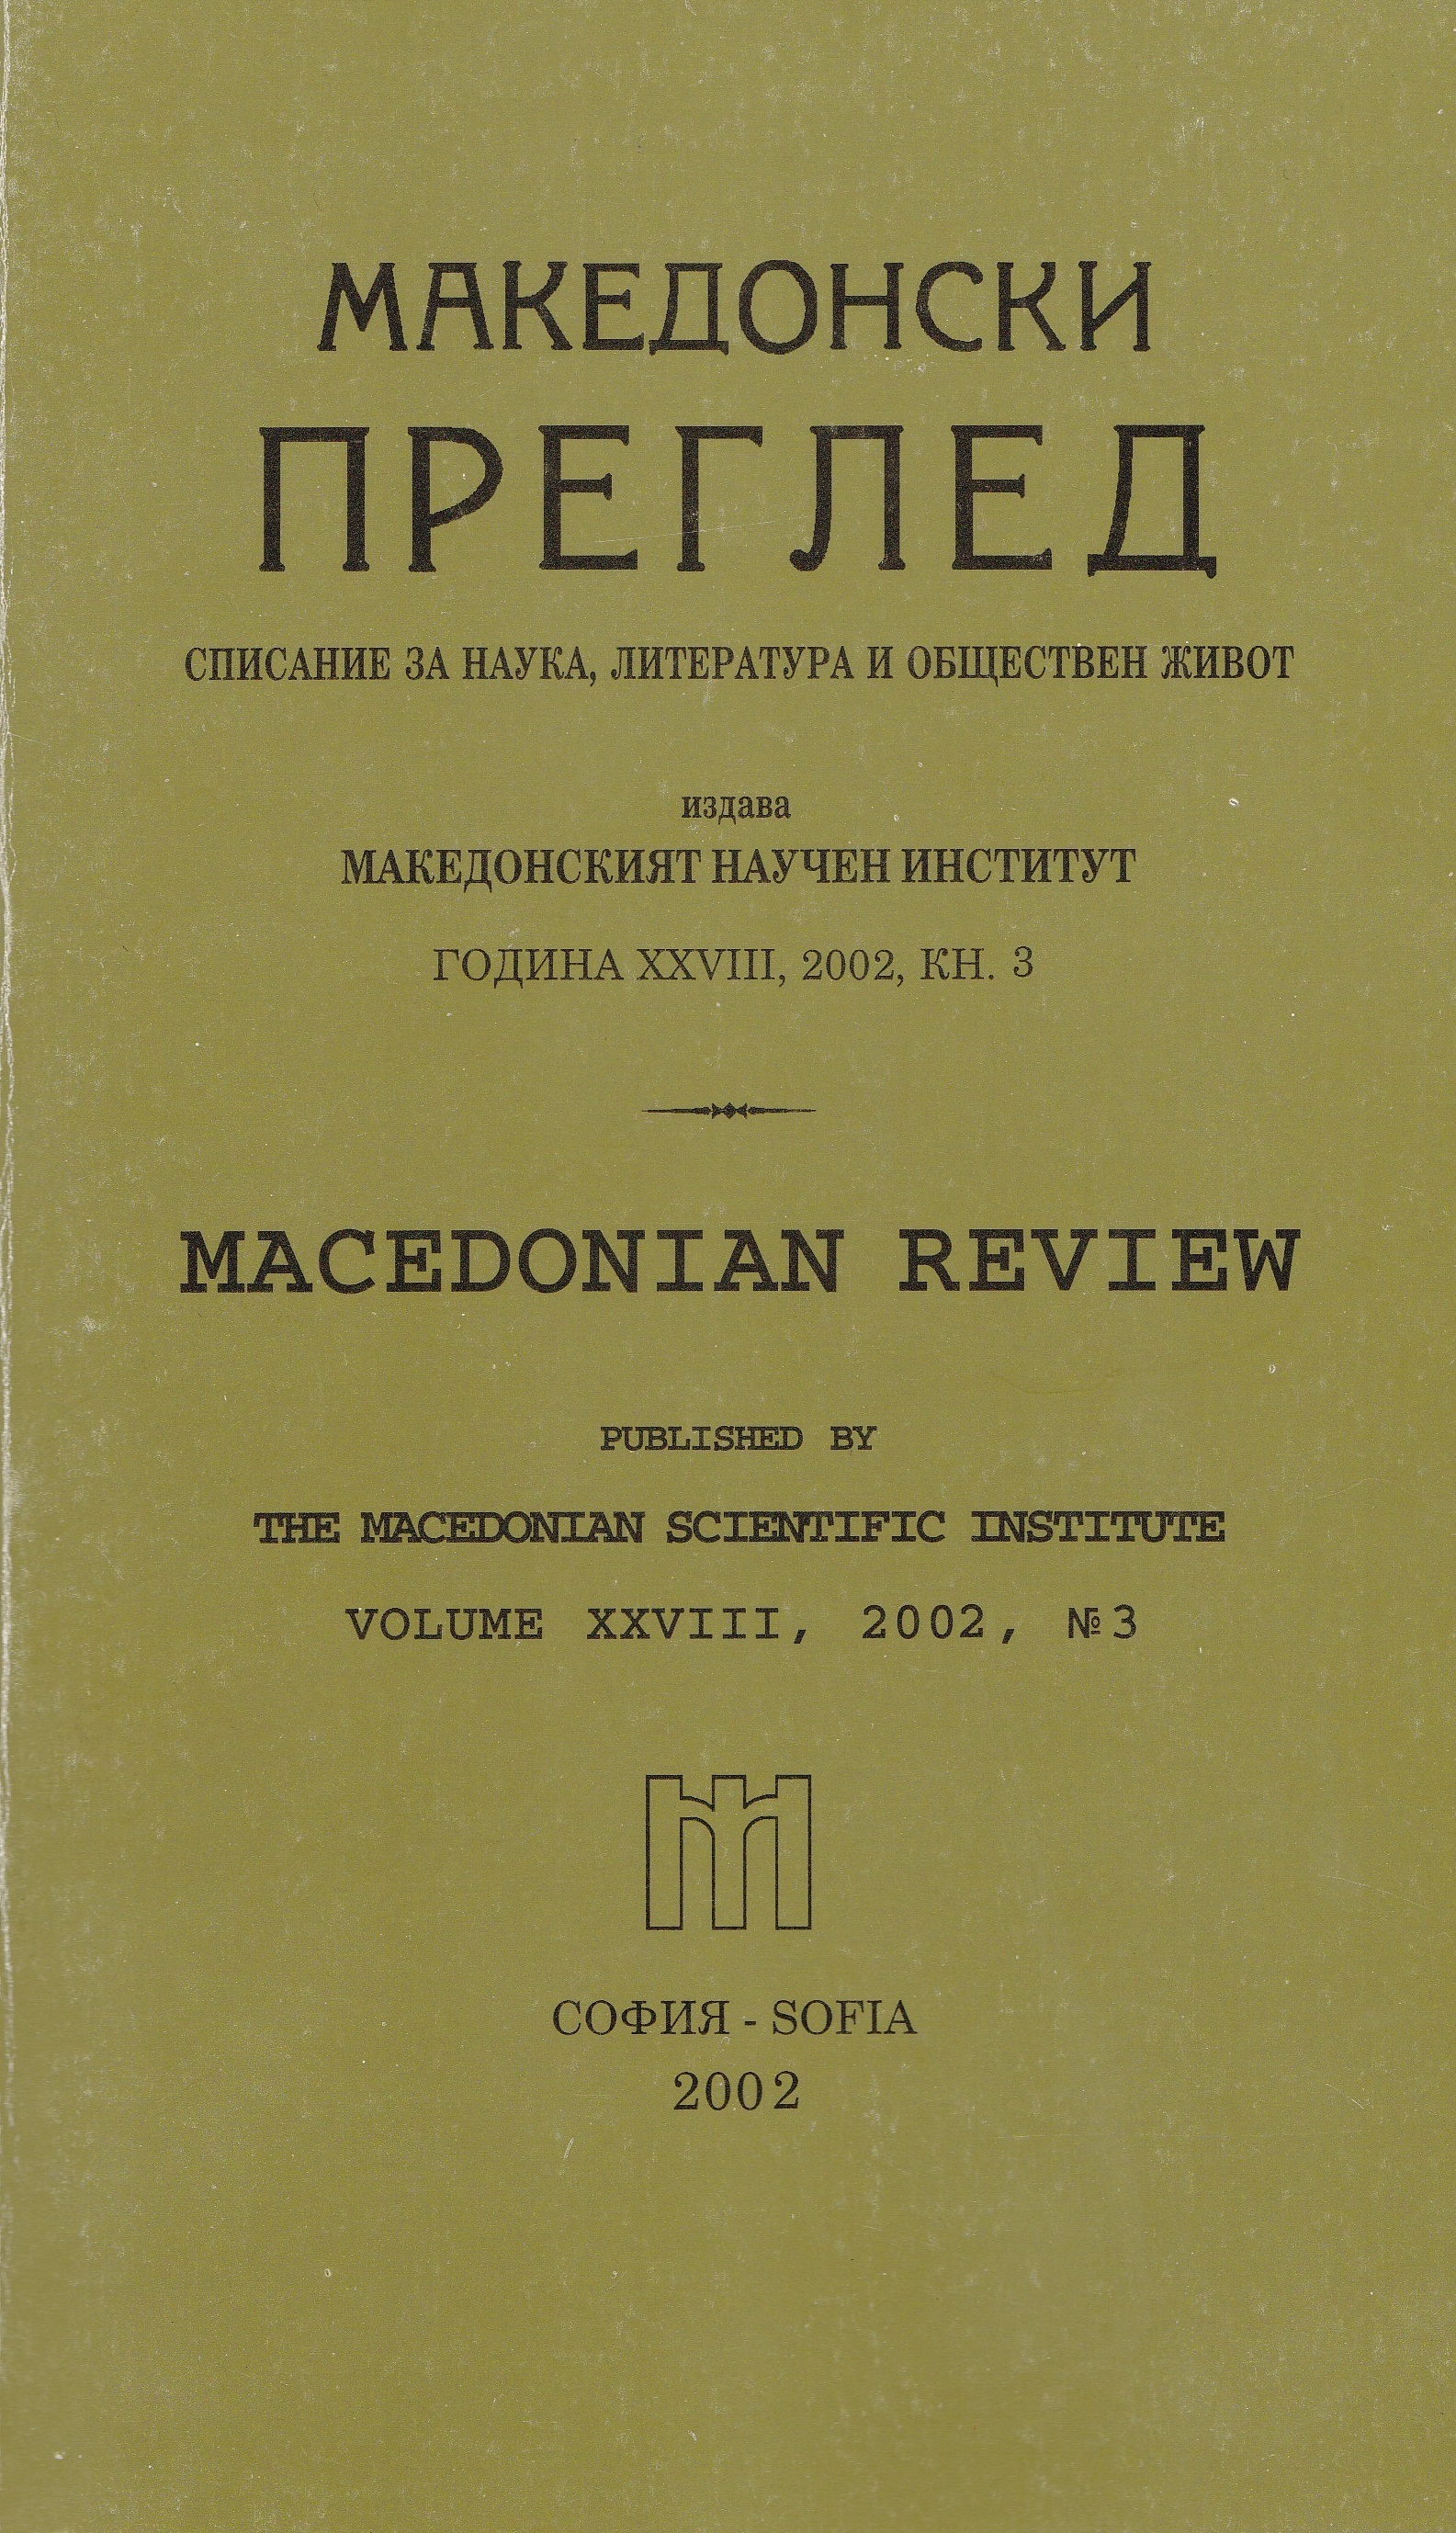 An Academic Seminar of the Macedonian Scientific Institute Cover Image